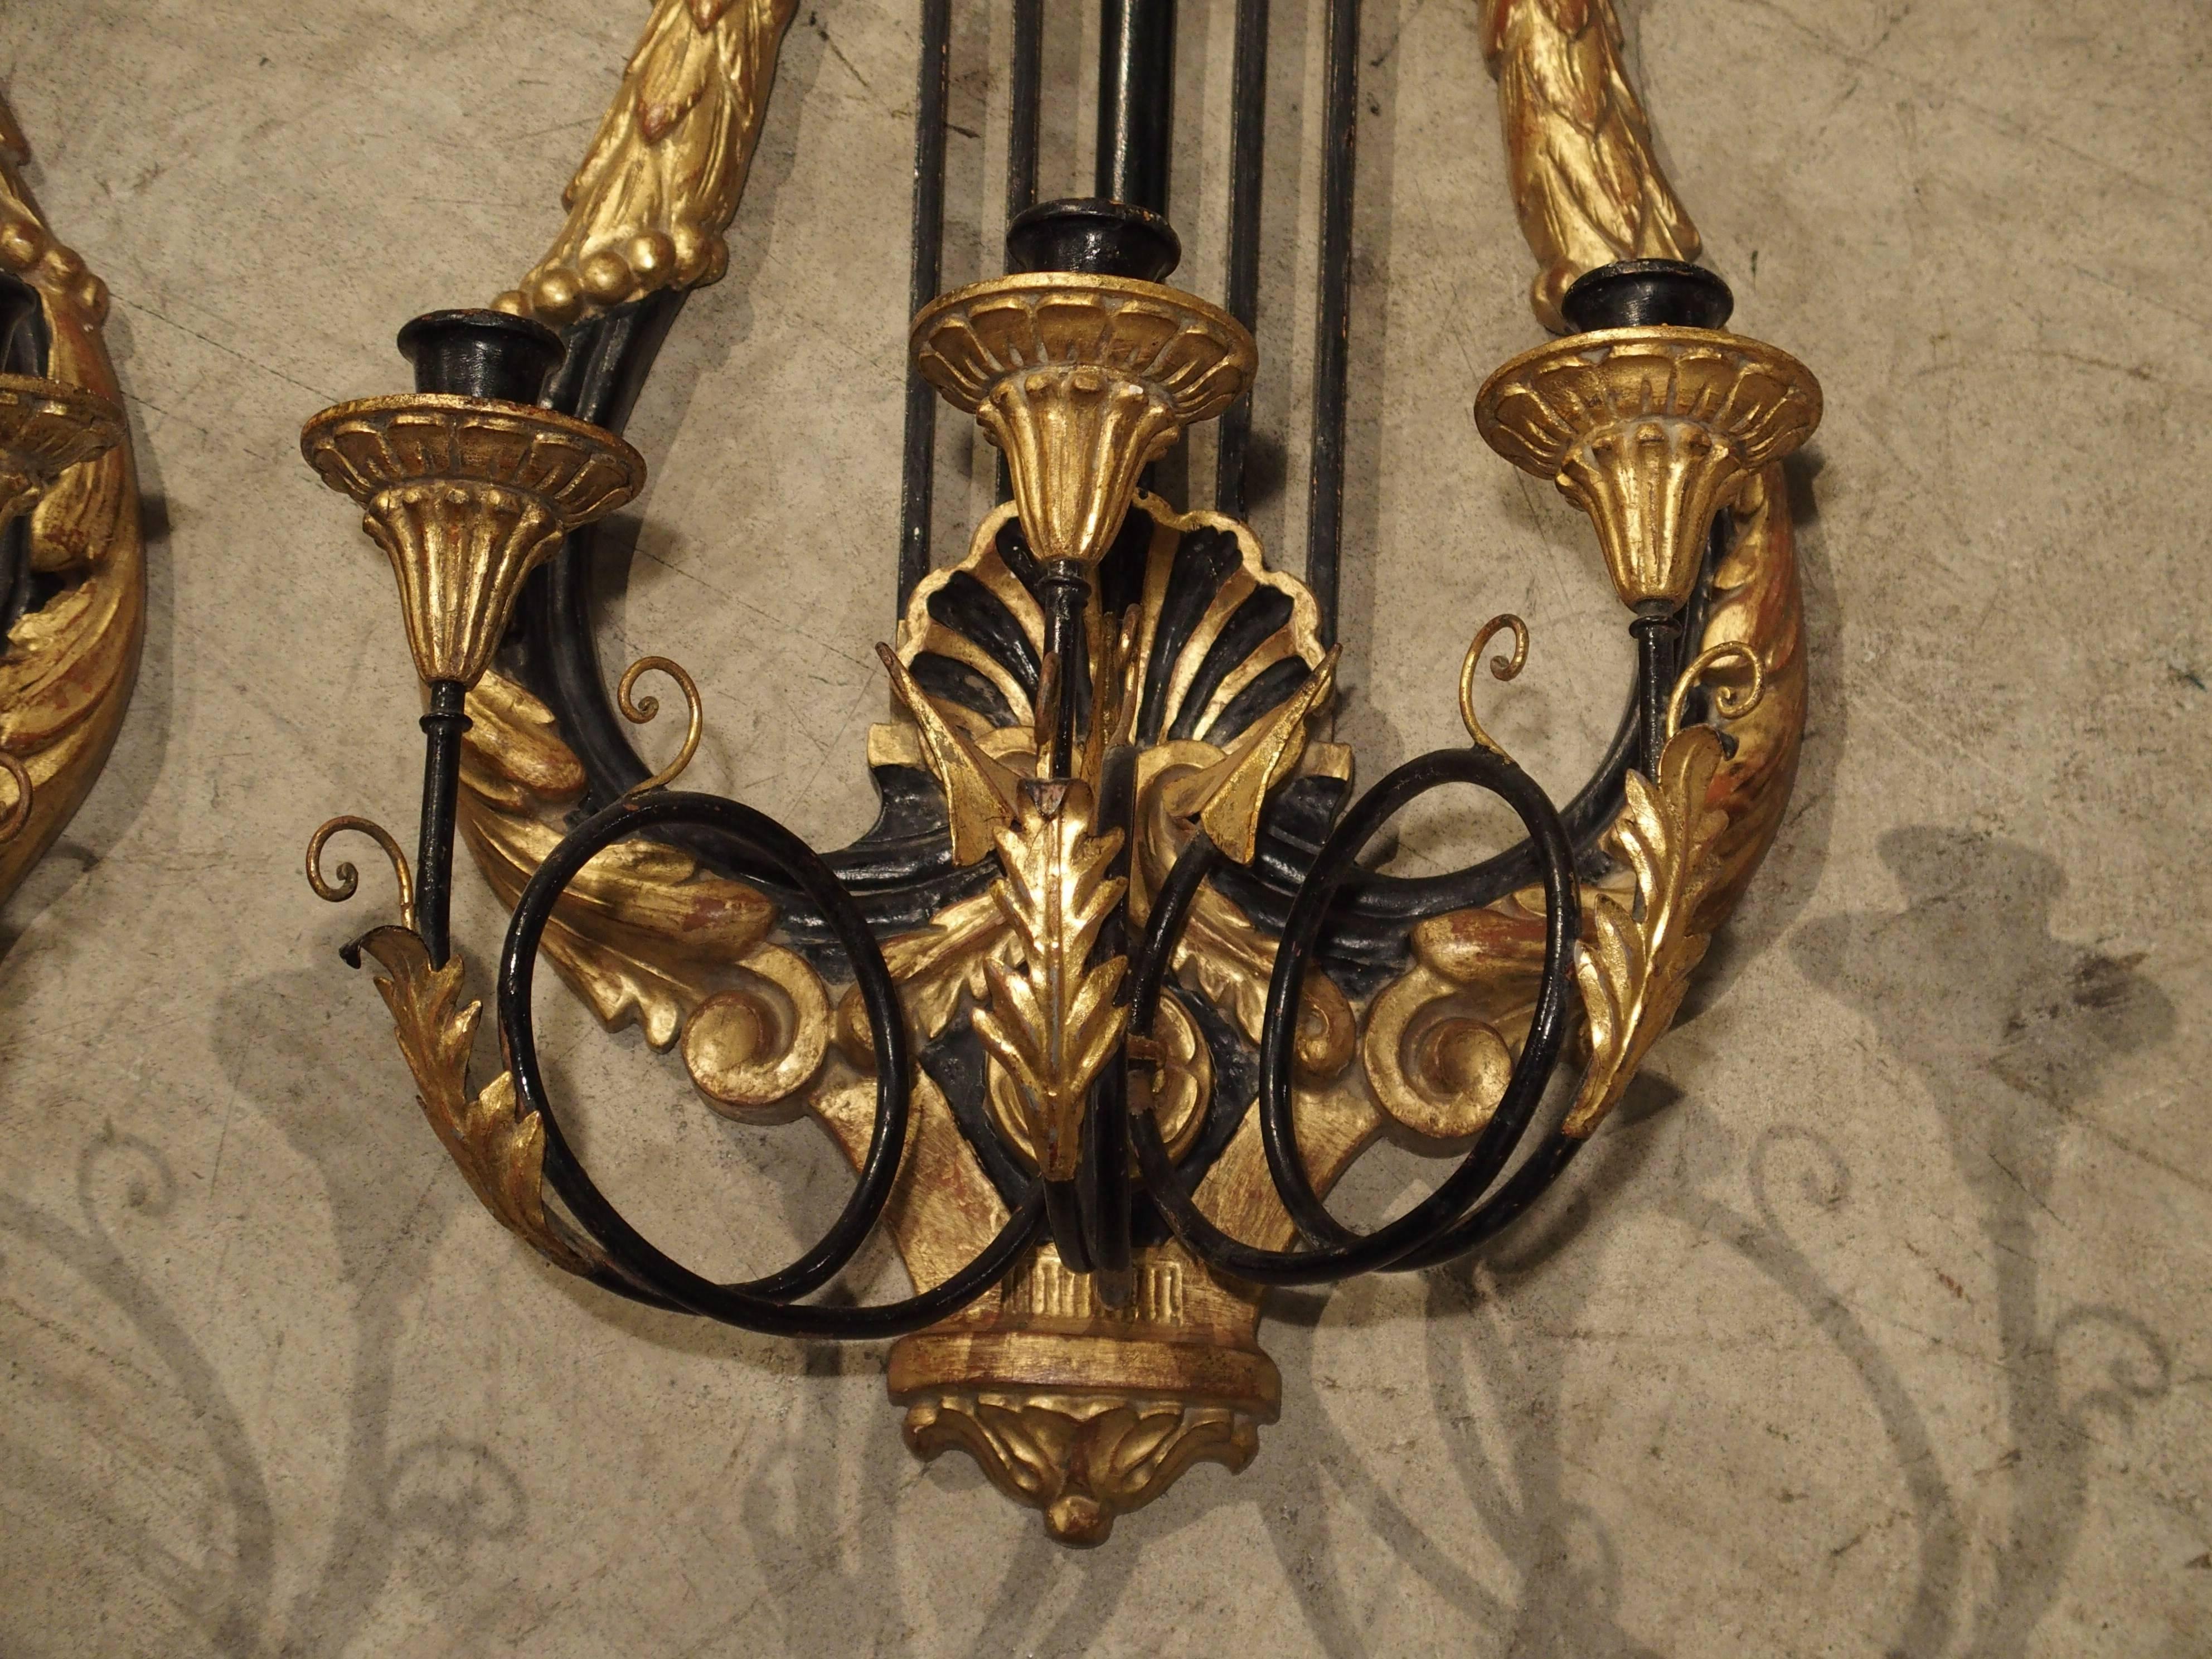 20th Century Pair of Empire Style Carved Wood and Metal Sconces from Italy